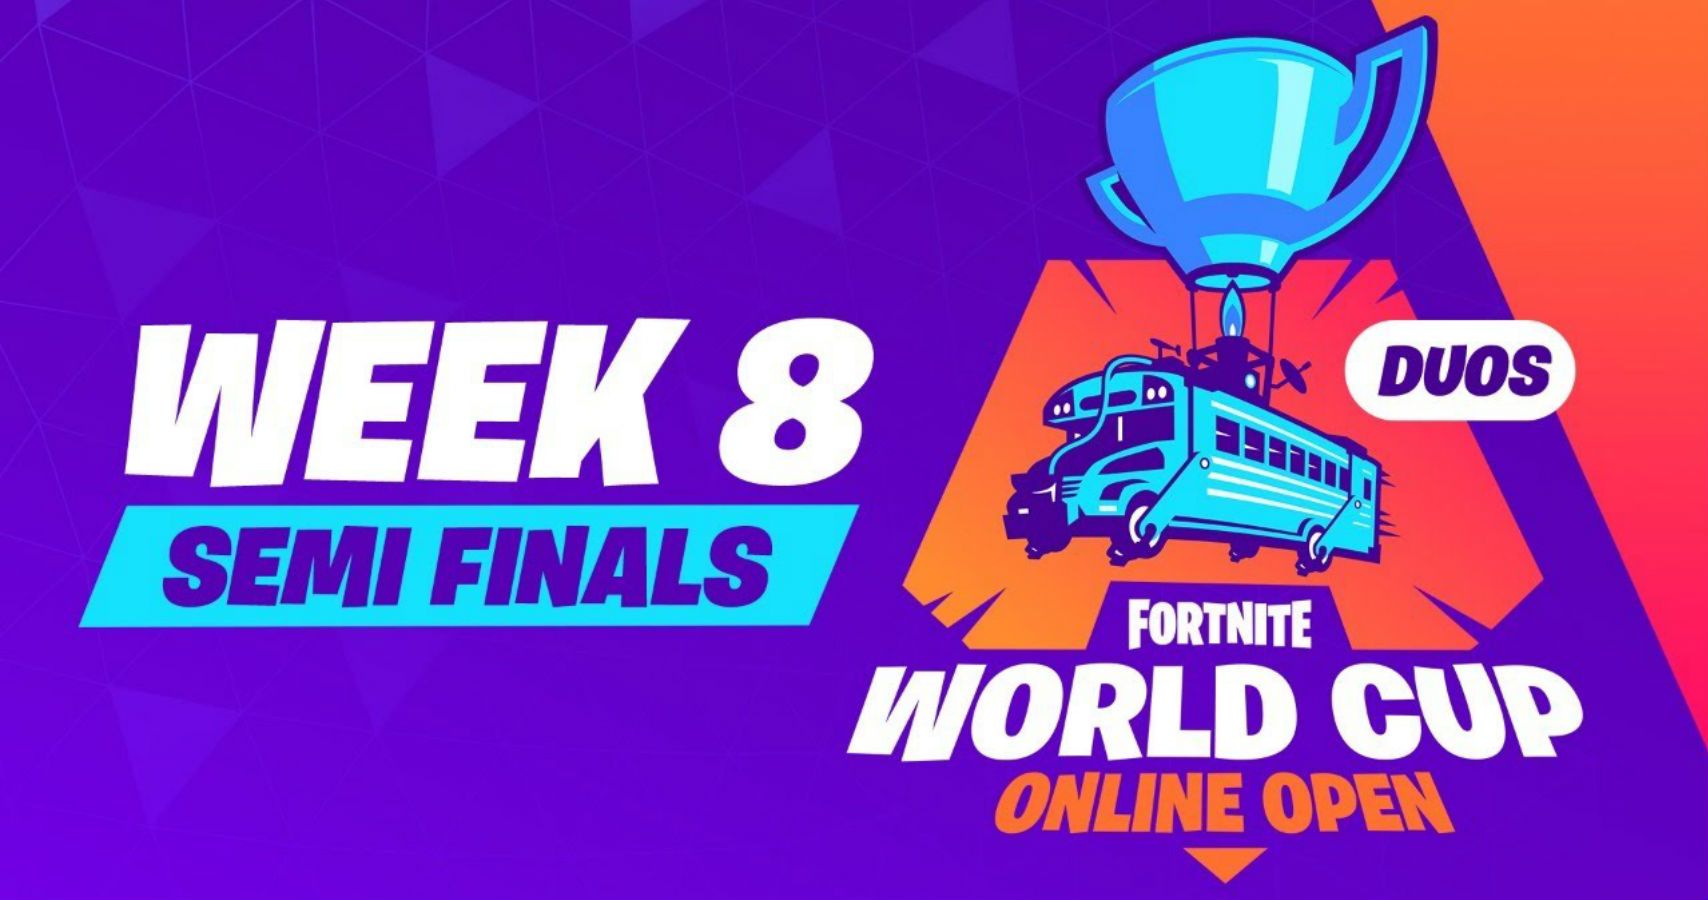 Known Cheater Still Qualifies For Fortnite World Cup